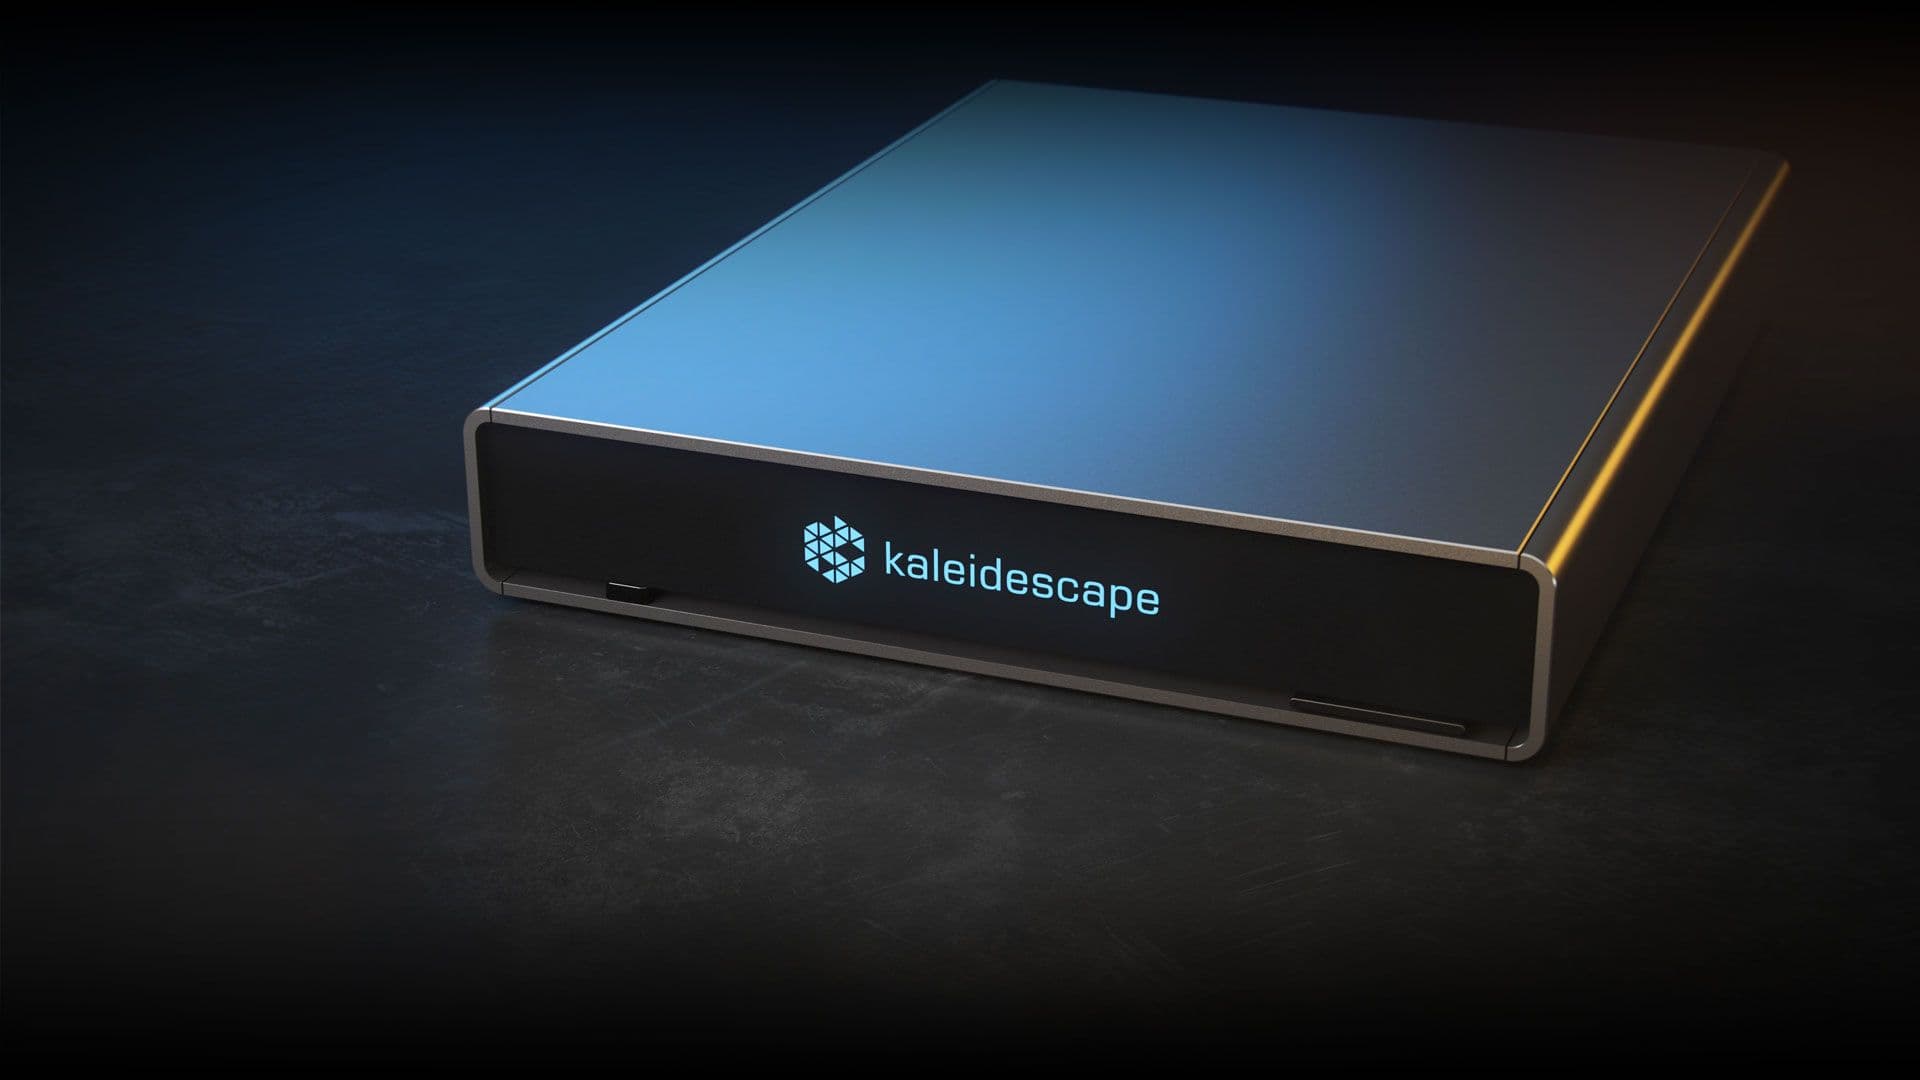 Kaleidescape's super high-end streaming alternative is now much cheaper